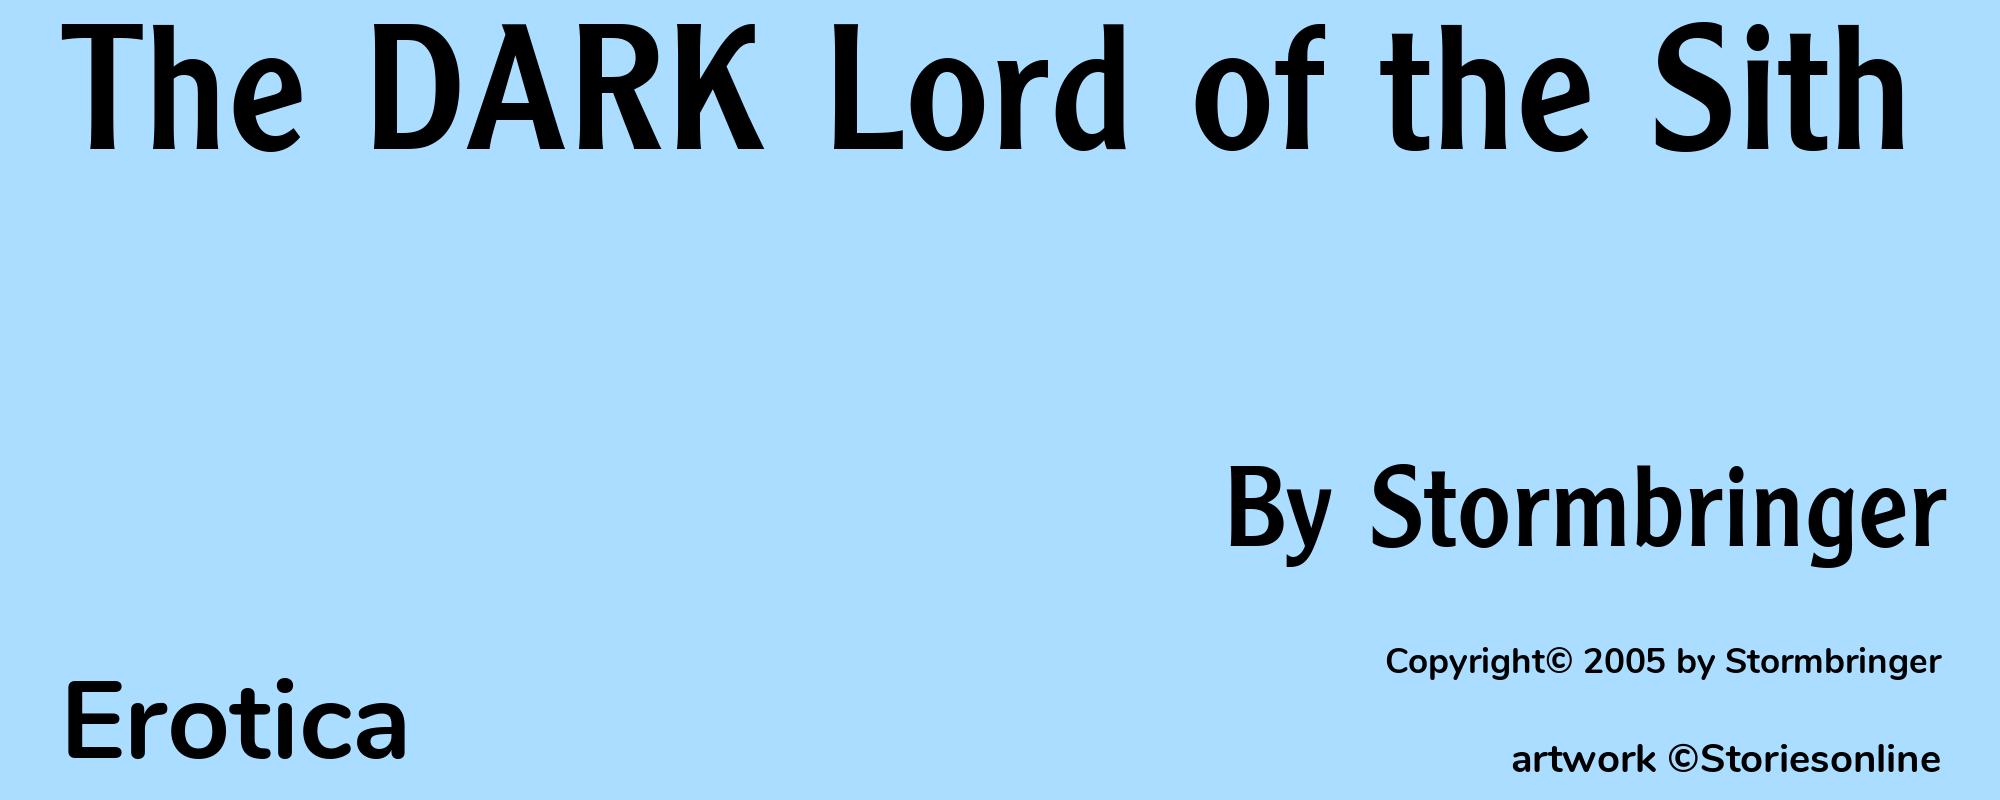 The DARK Lord of the Sith - Cover